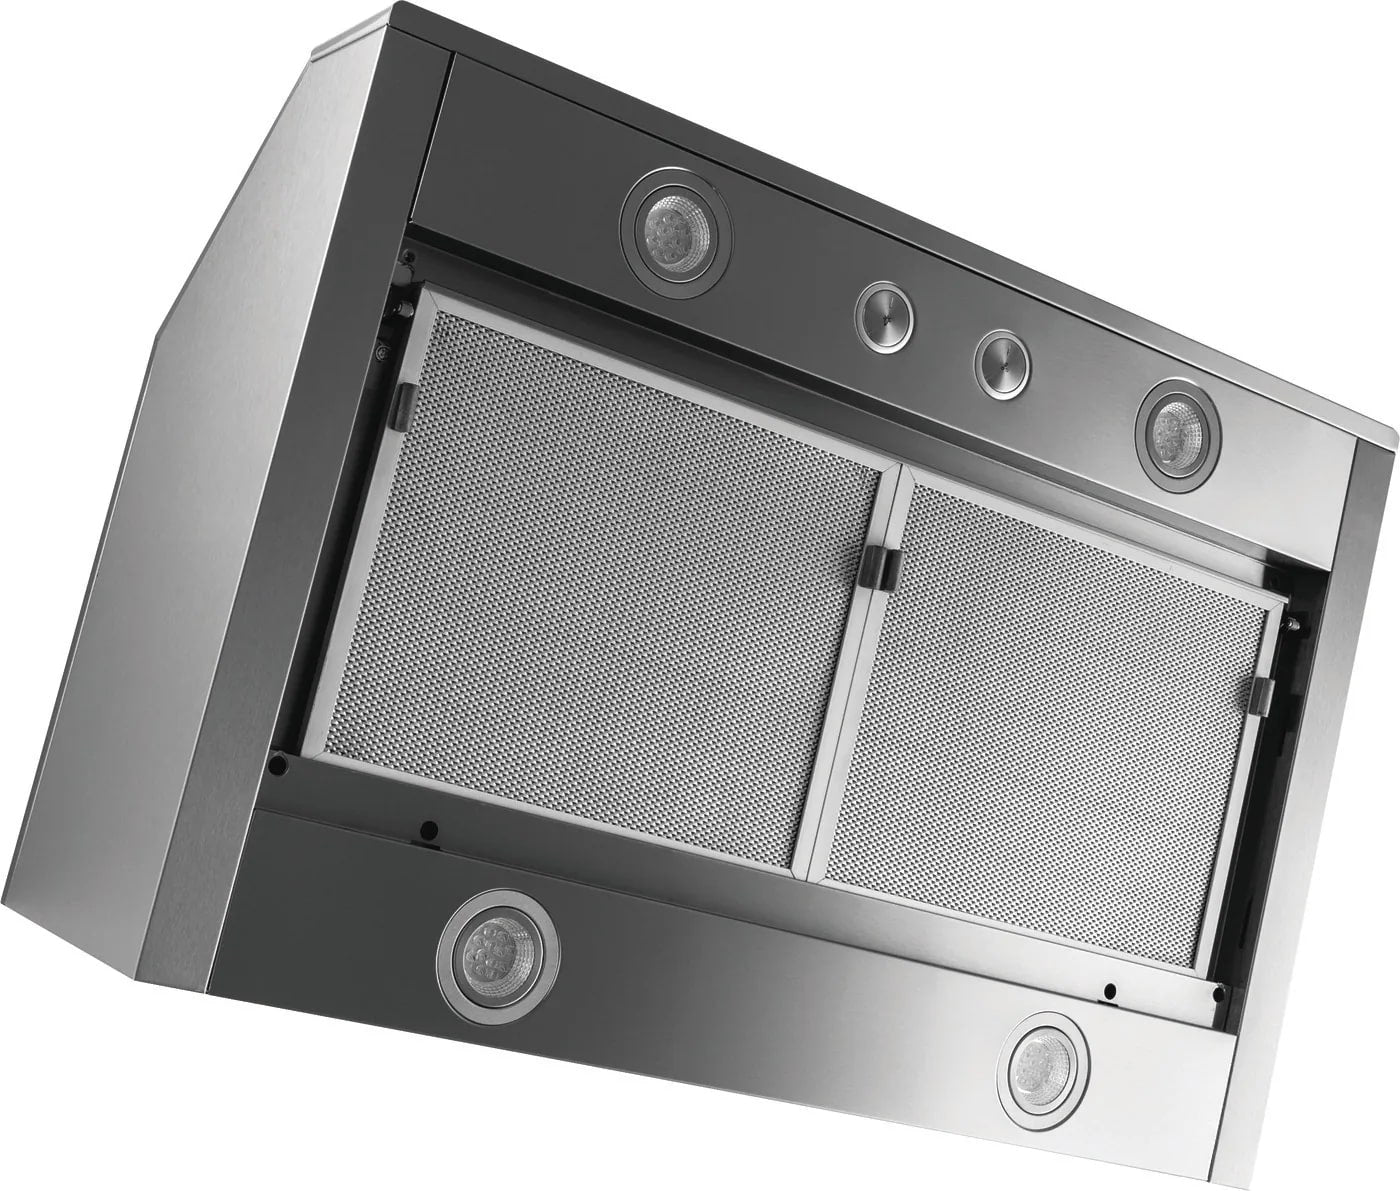 Frigidaire Professional - 30 Inch 400 CFM Under Cabinet Range Vent in Stainless - FHWC3050RS